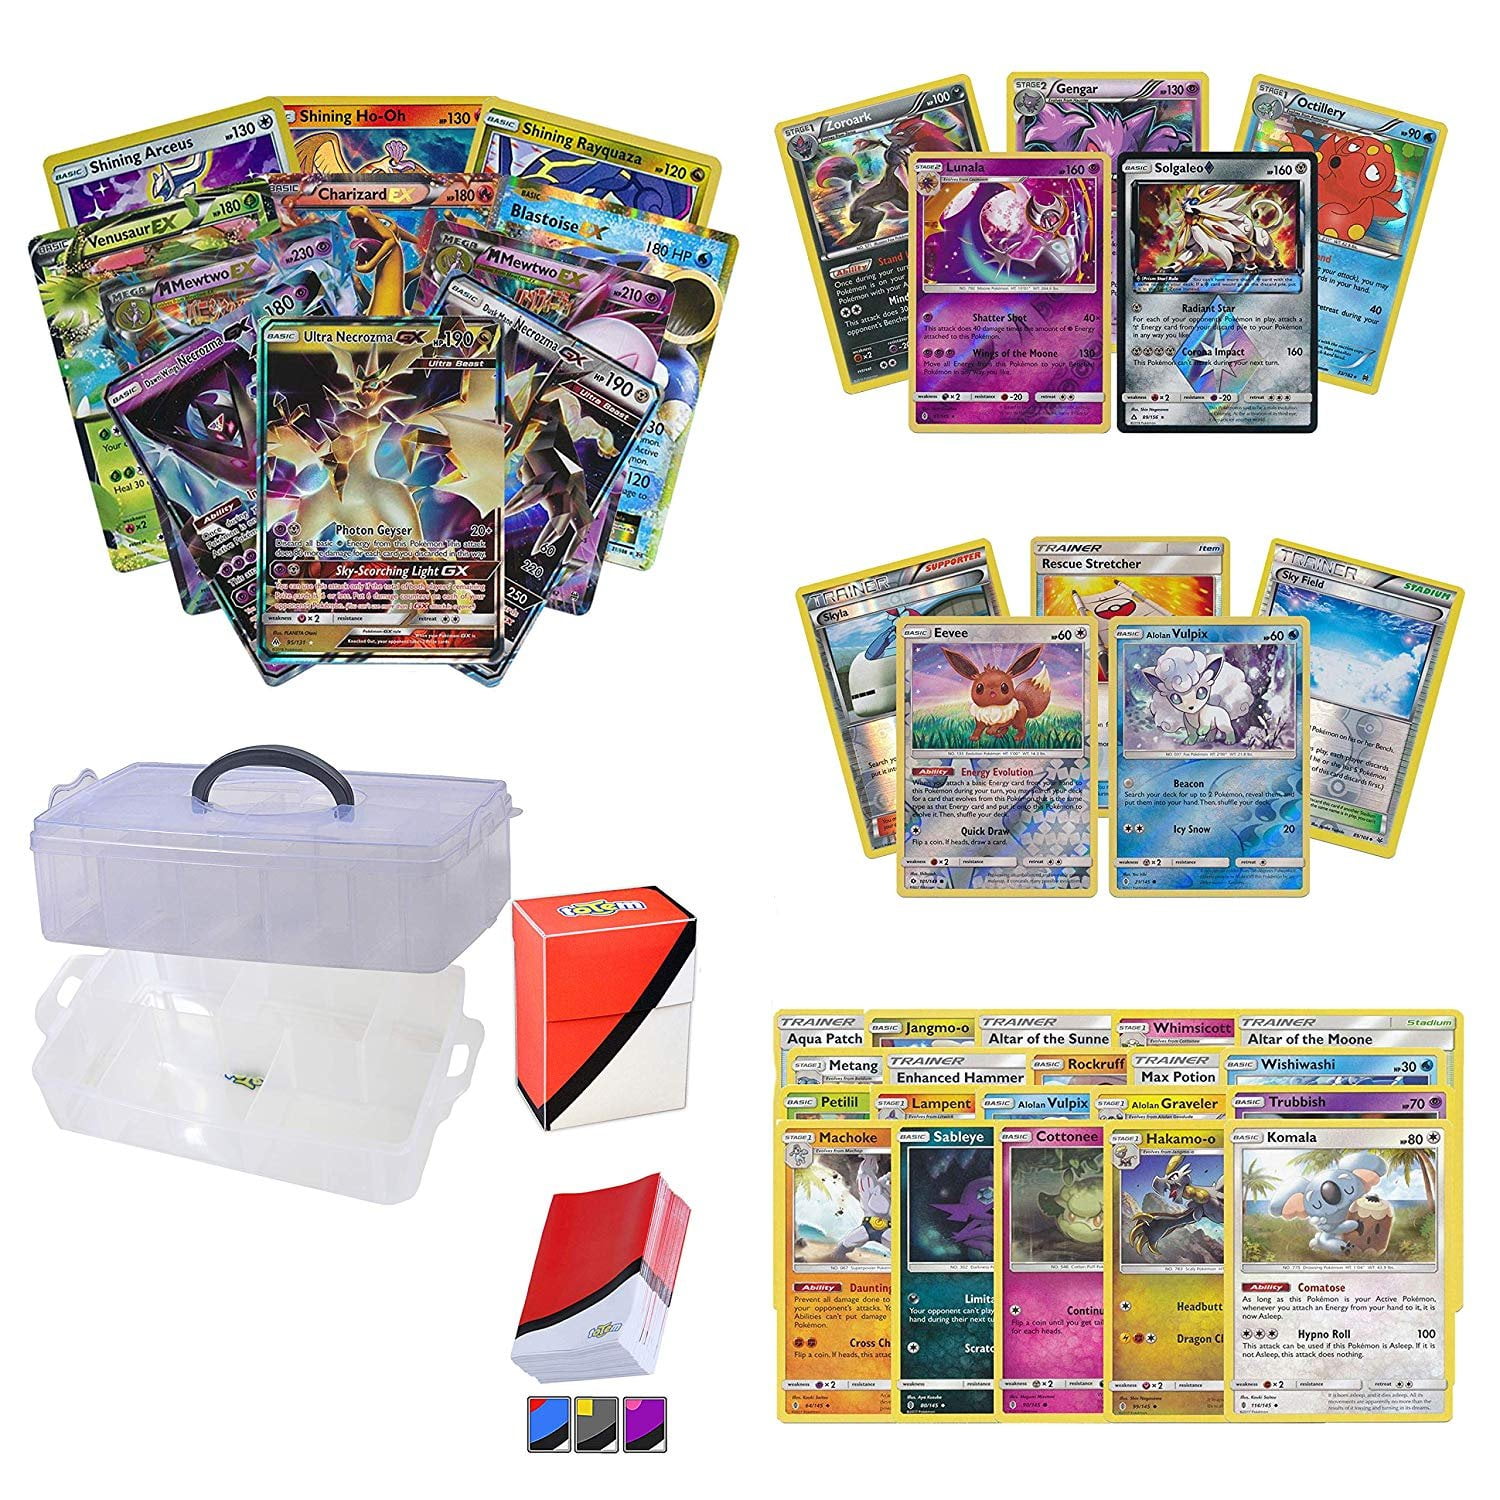 1 pack of MIXED POKEMON GAME /& TRAINER 60 CARD LOT IN DECK Variety pack